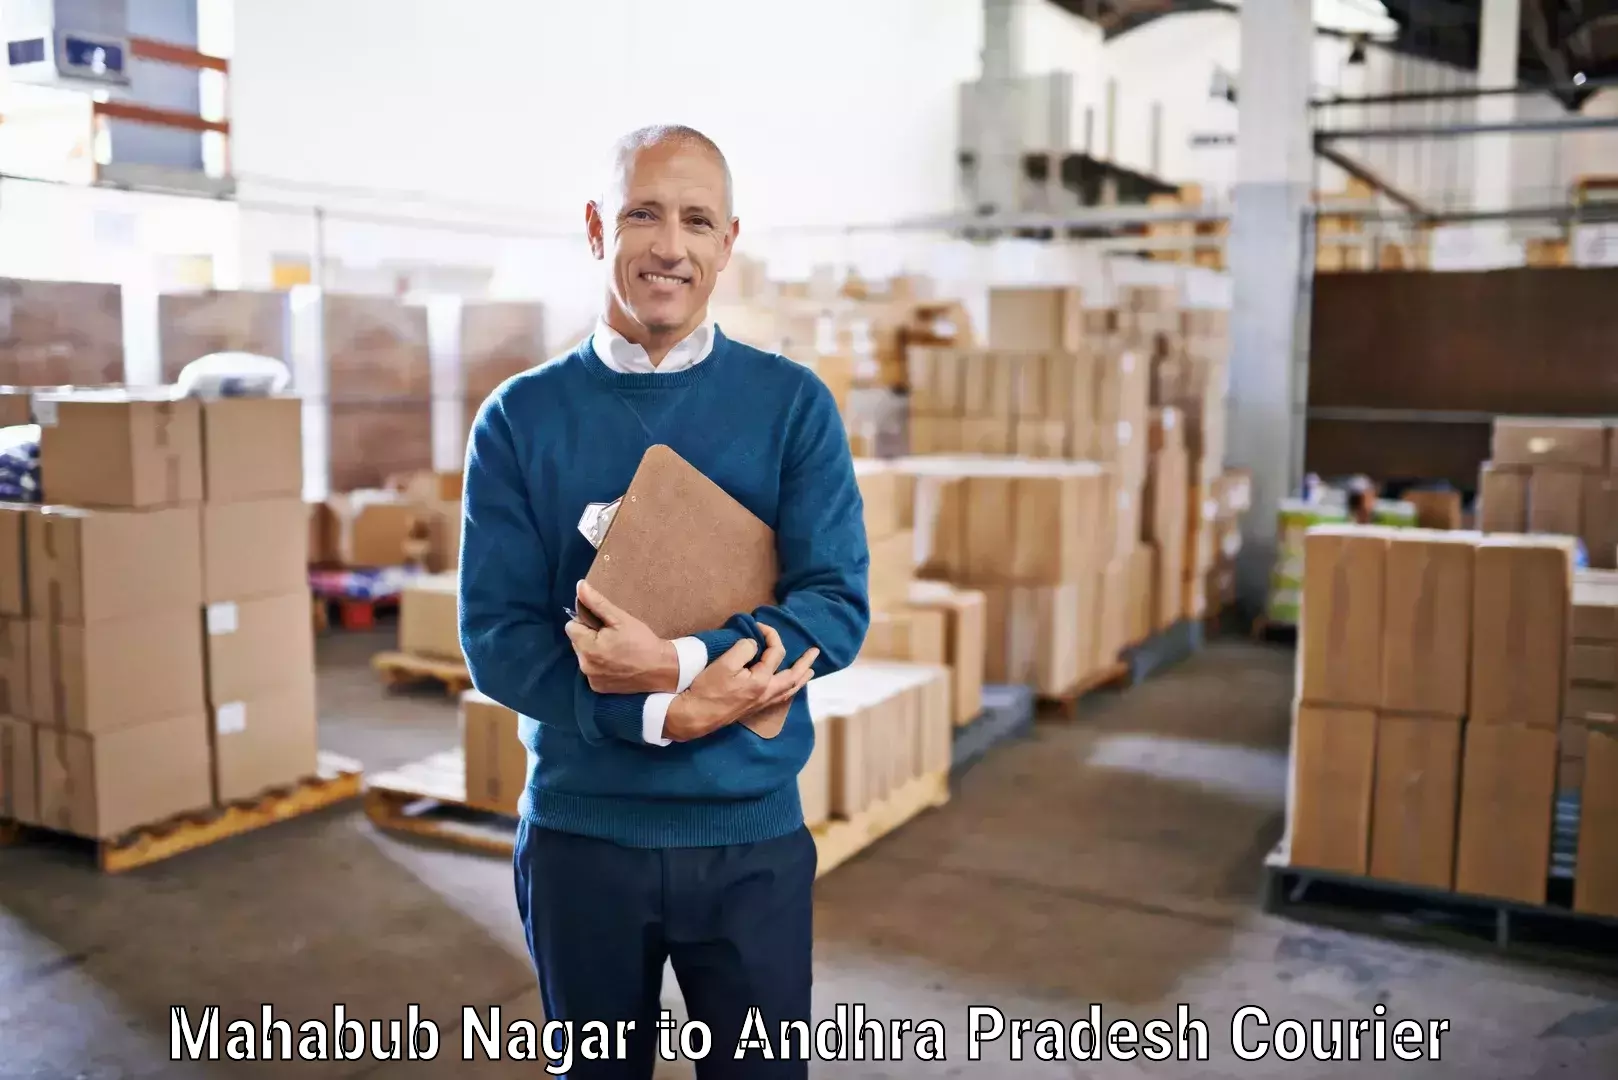 Quality courier services in Mahabub Nagar to Nuzvid